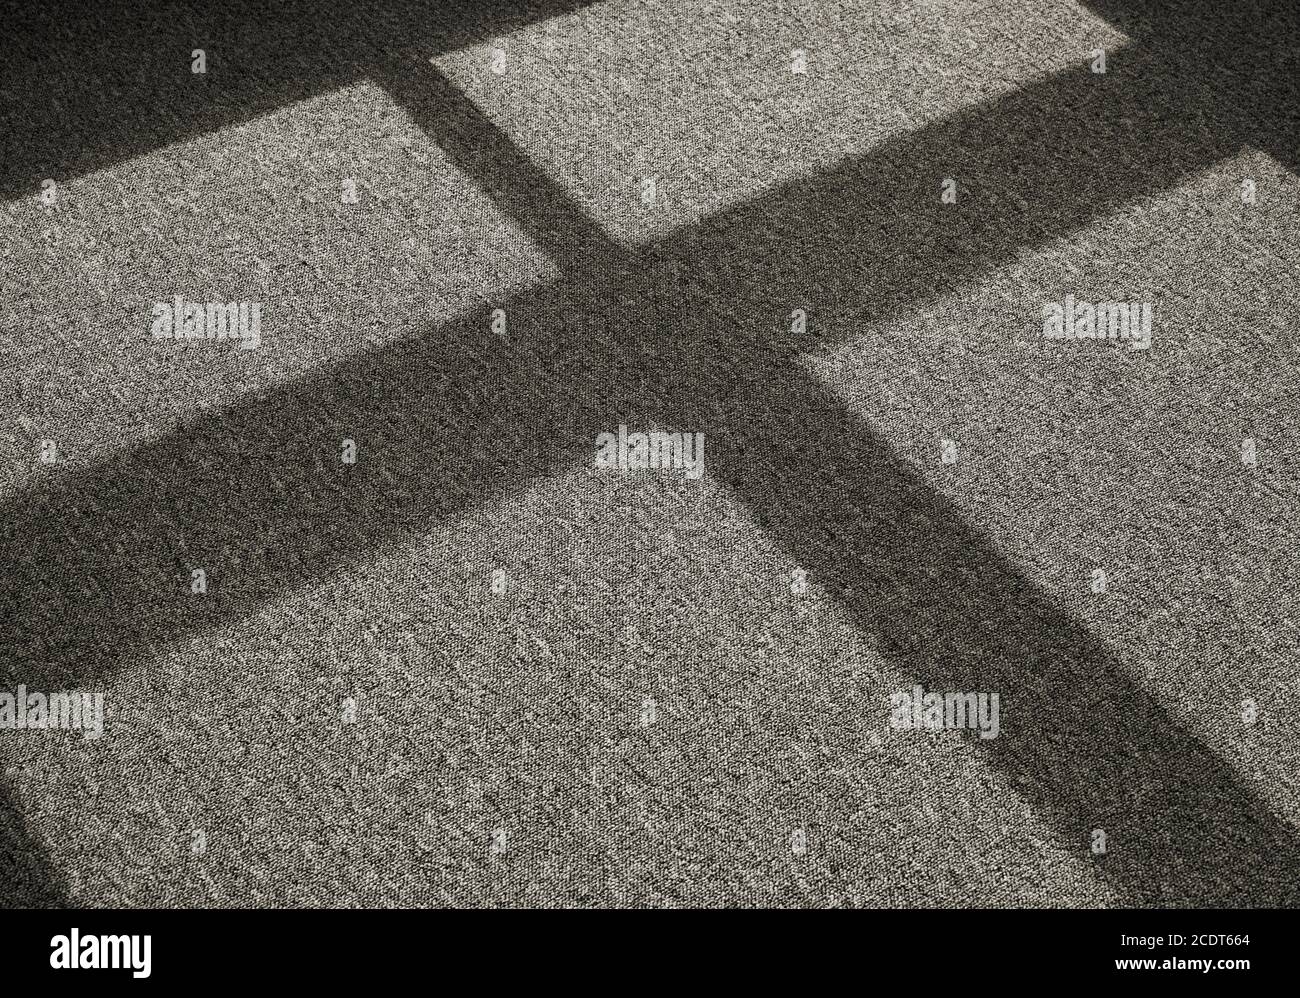 Shadow by incident light on a carpet floor in front of a window Stock Photo